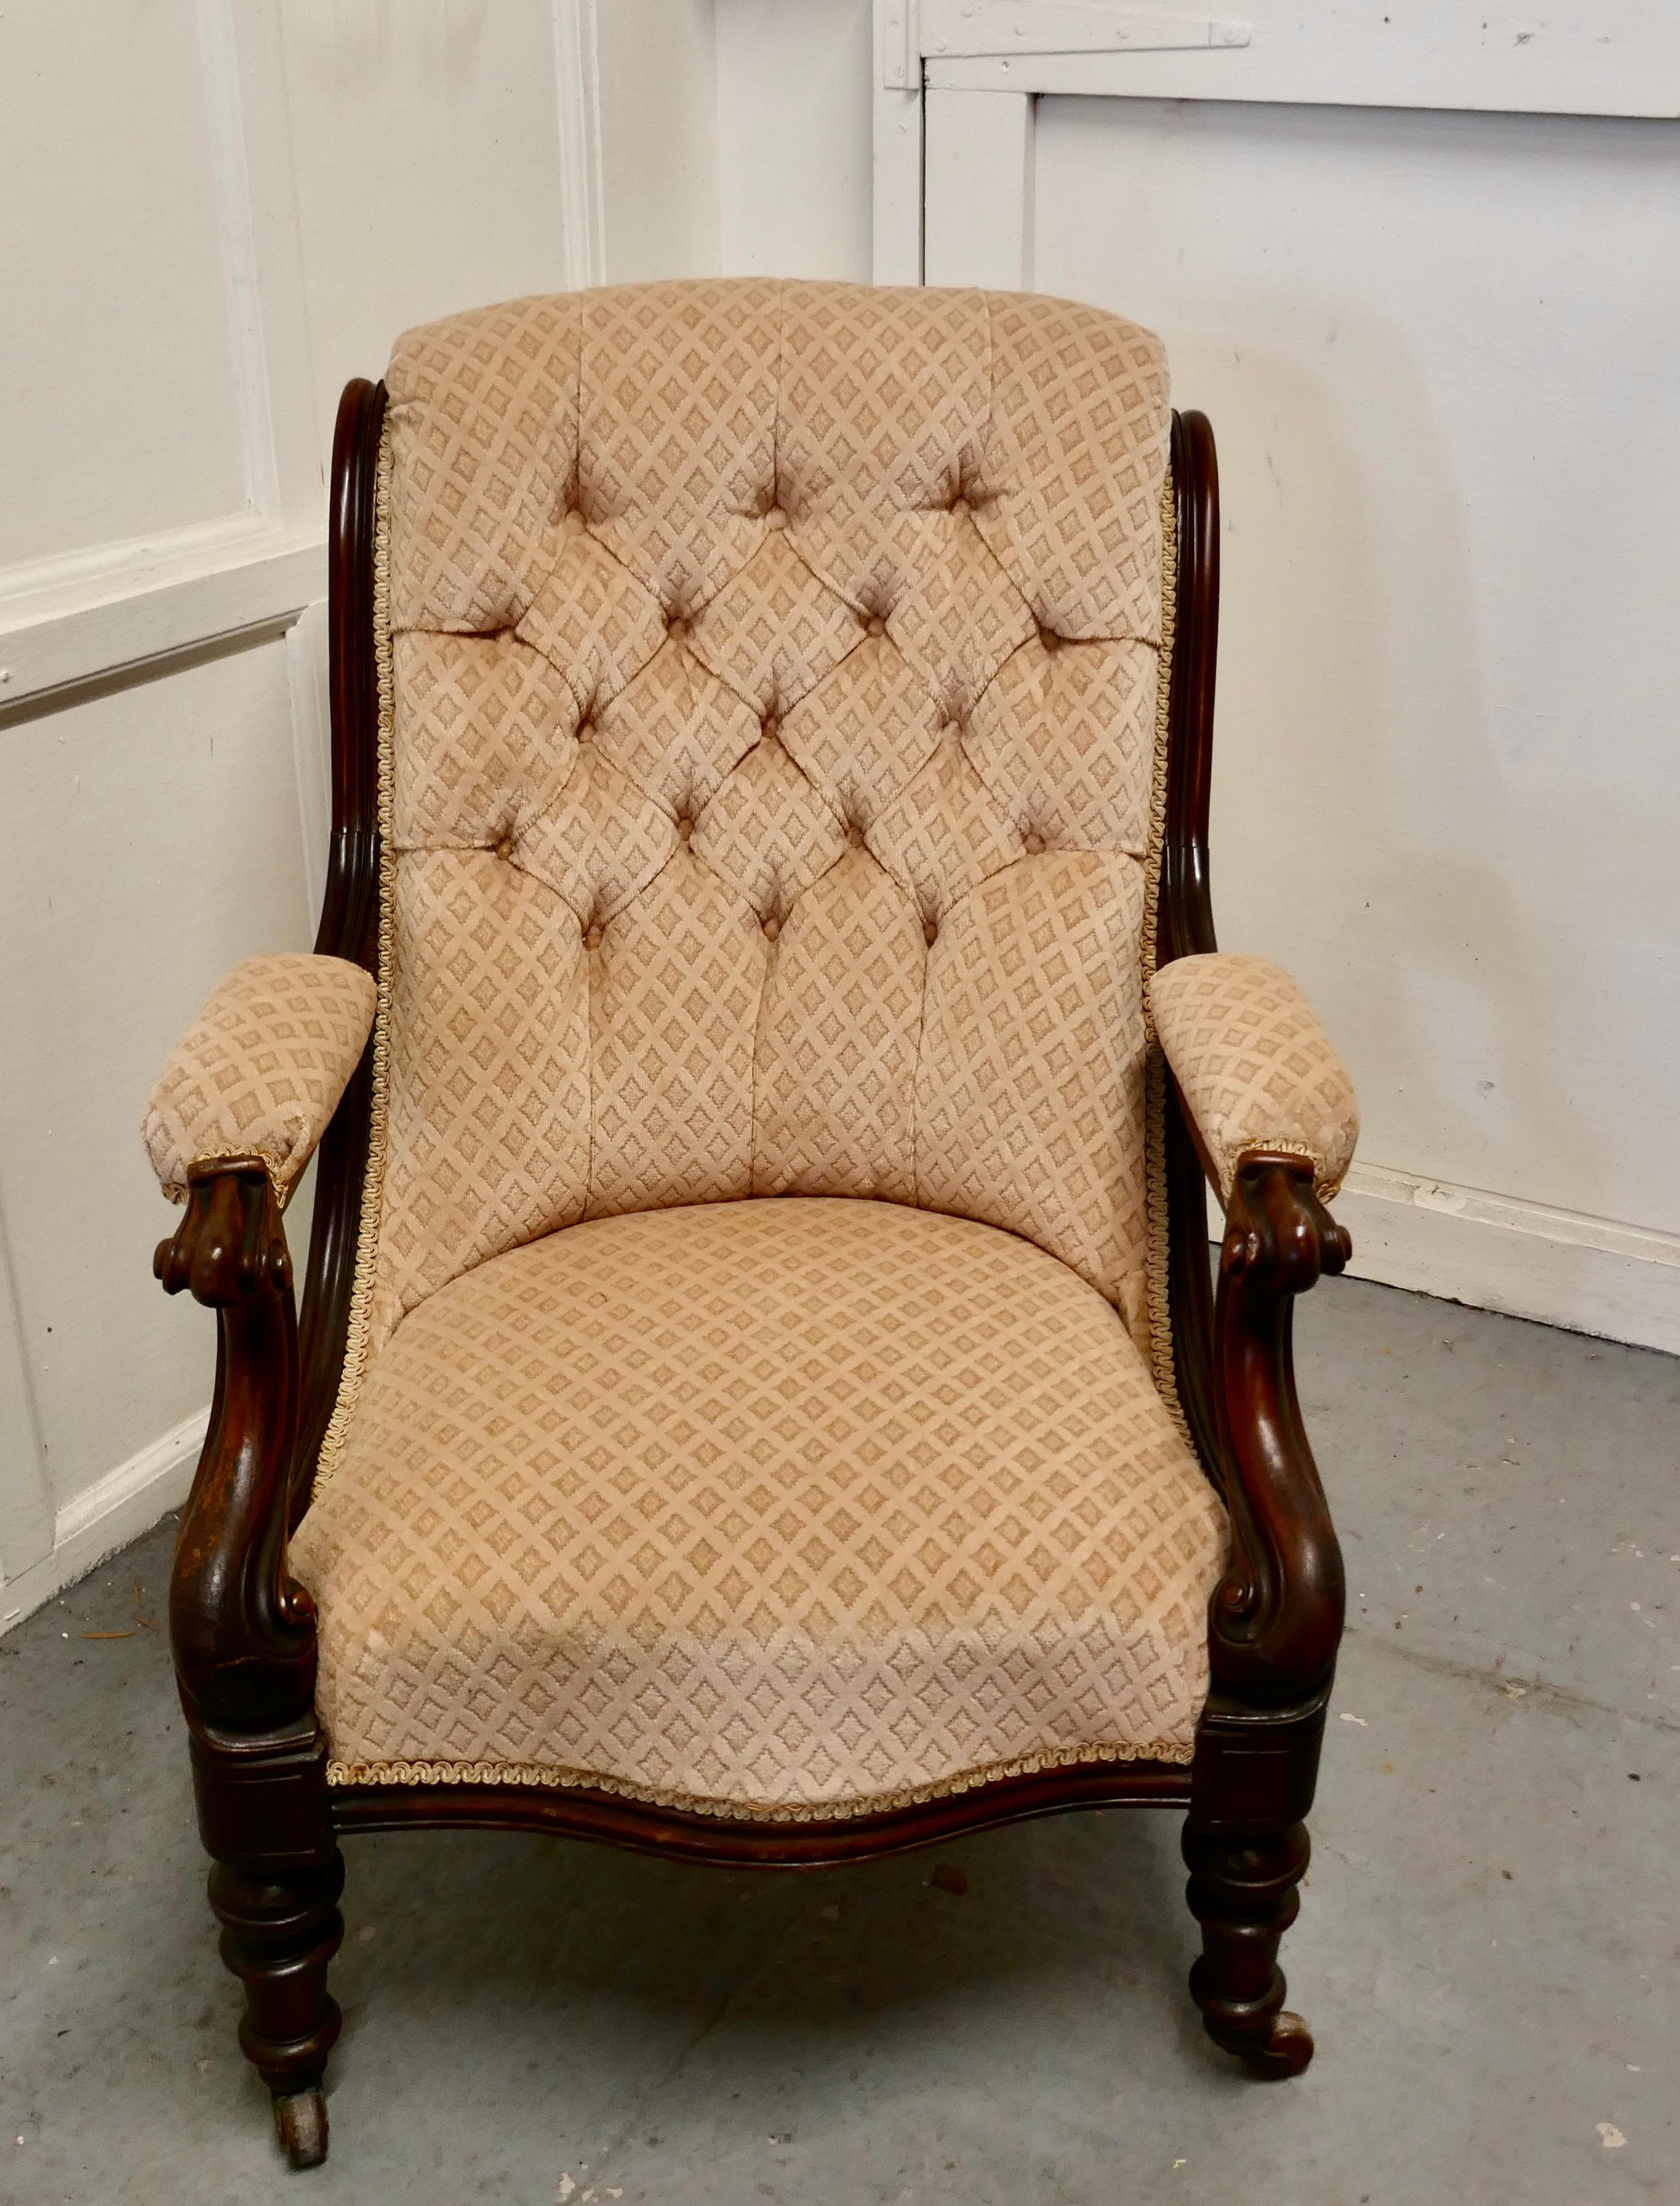 A fine quality William IV mahogany button back chair

 This is a superbly comfortable arm chair, it has a curved deeply buttoned back, the chair is upholstered in a sculptured velvet, it has a mahogany frame, the front legs are turned and the arm